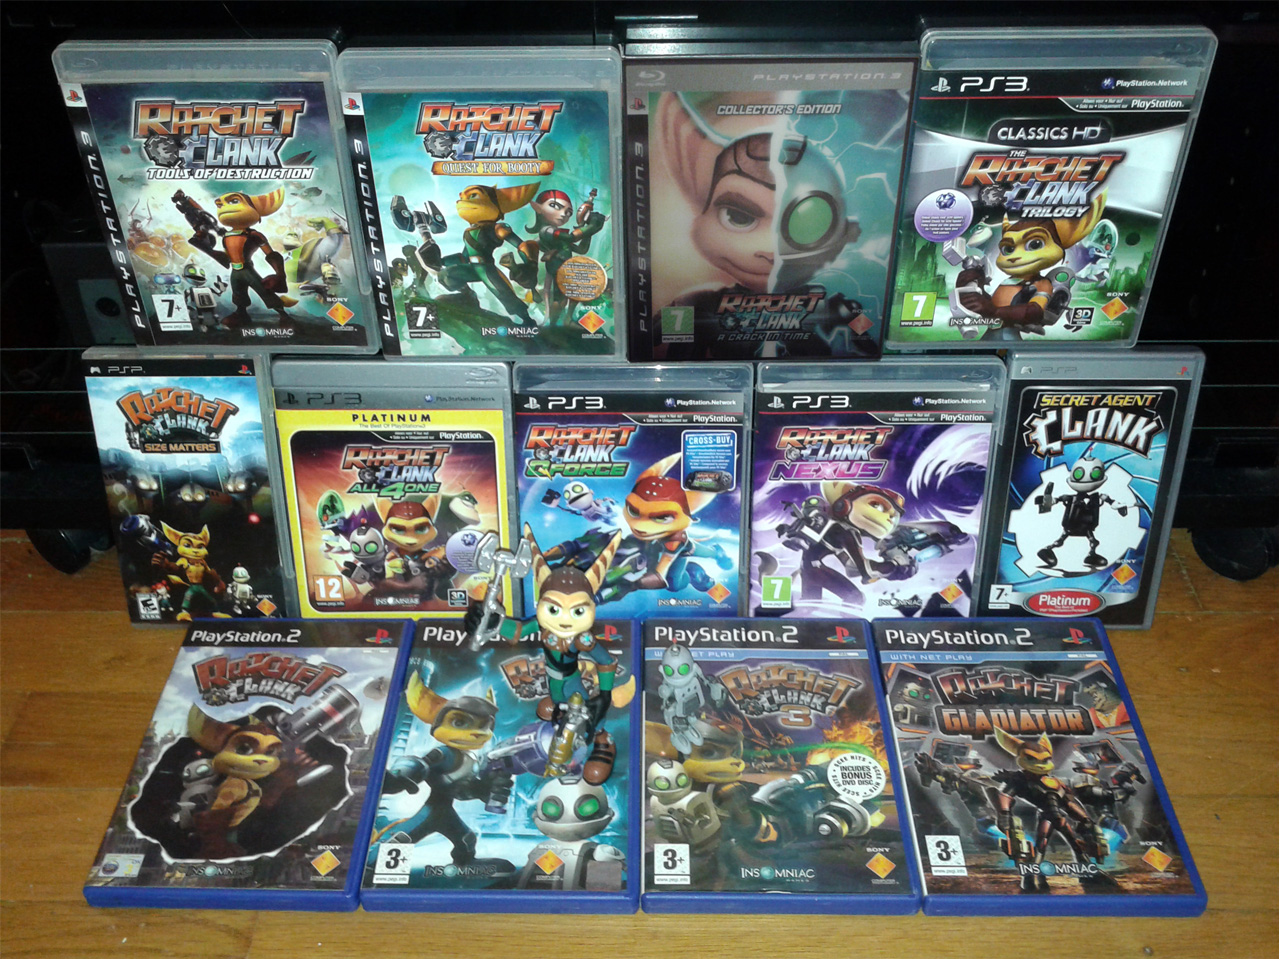 Ratchet clank collection #ps3 #museodevideojuegospr🇵🇷